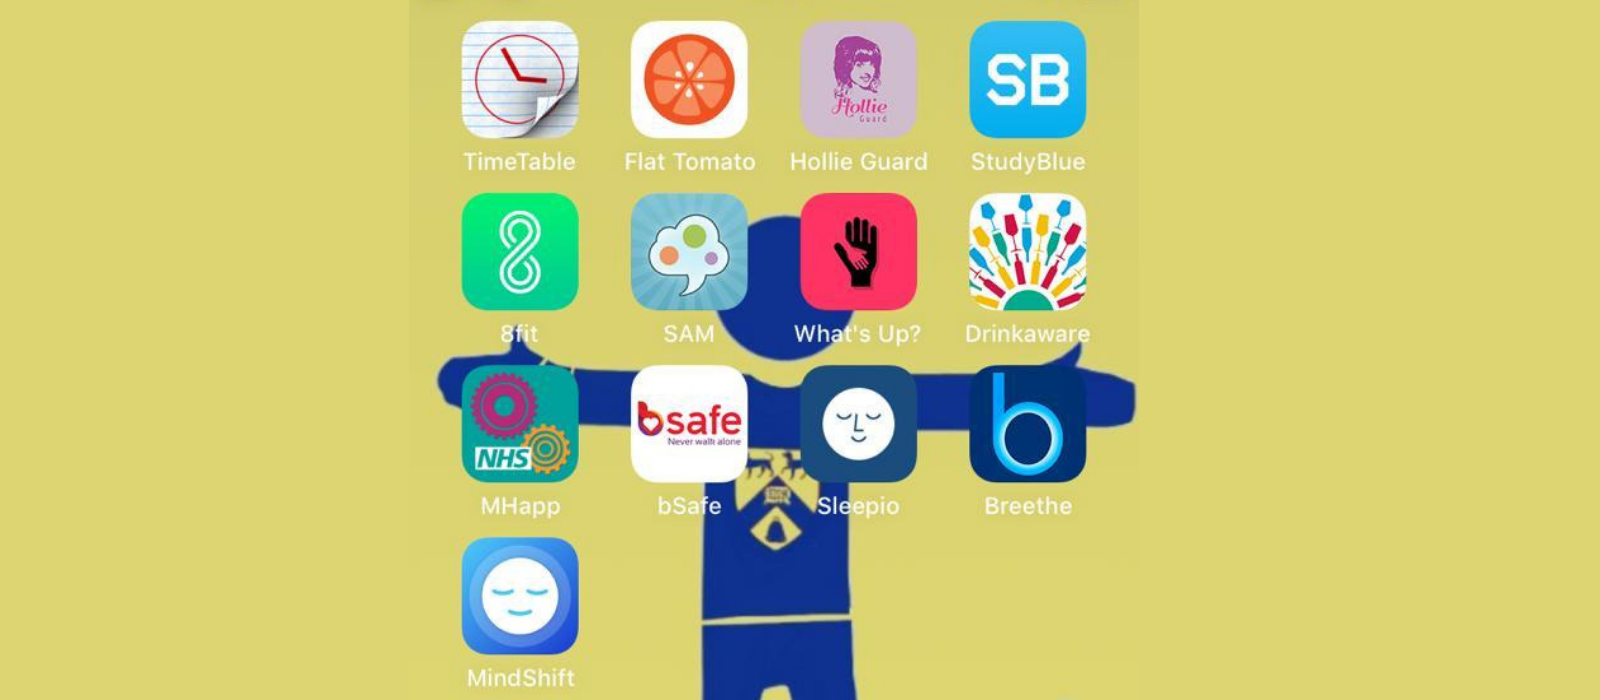 Apps recommended for Wellbeing at LMH updated April 2019	